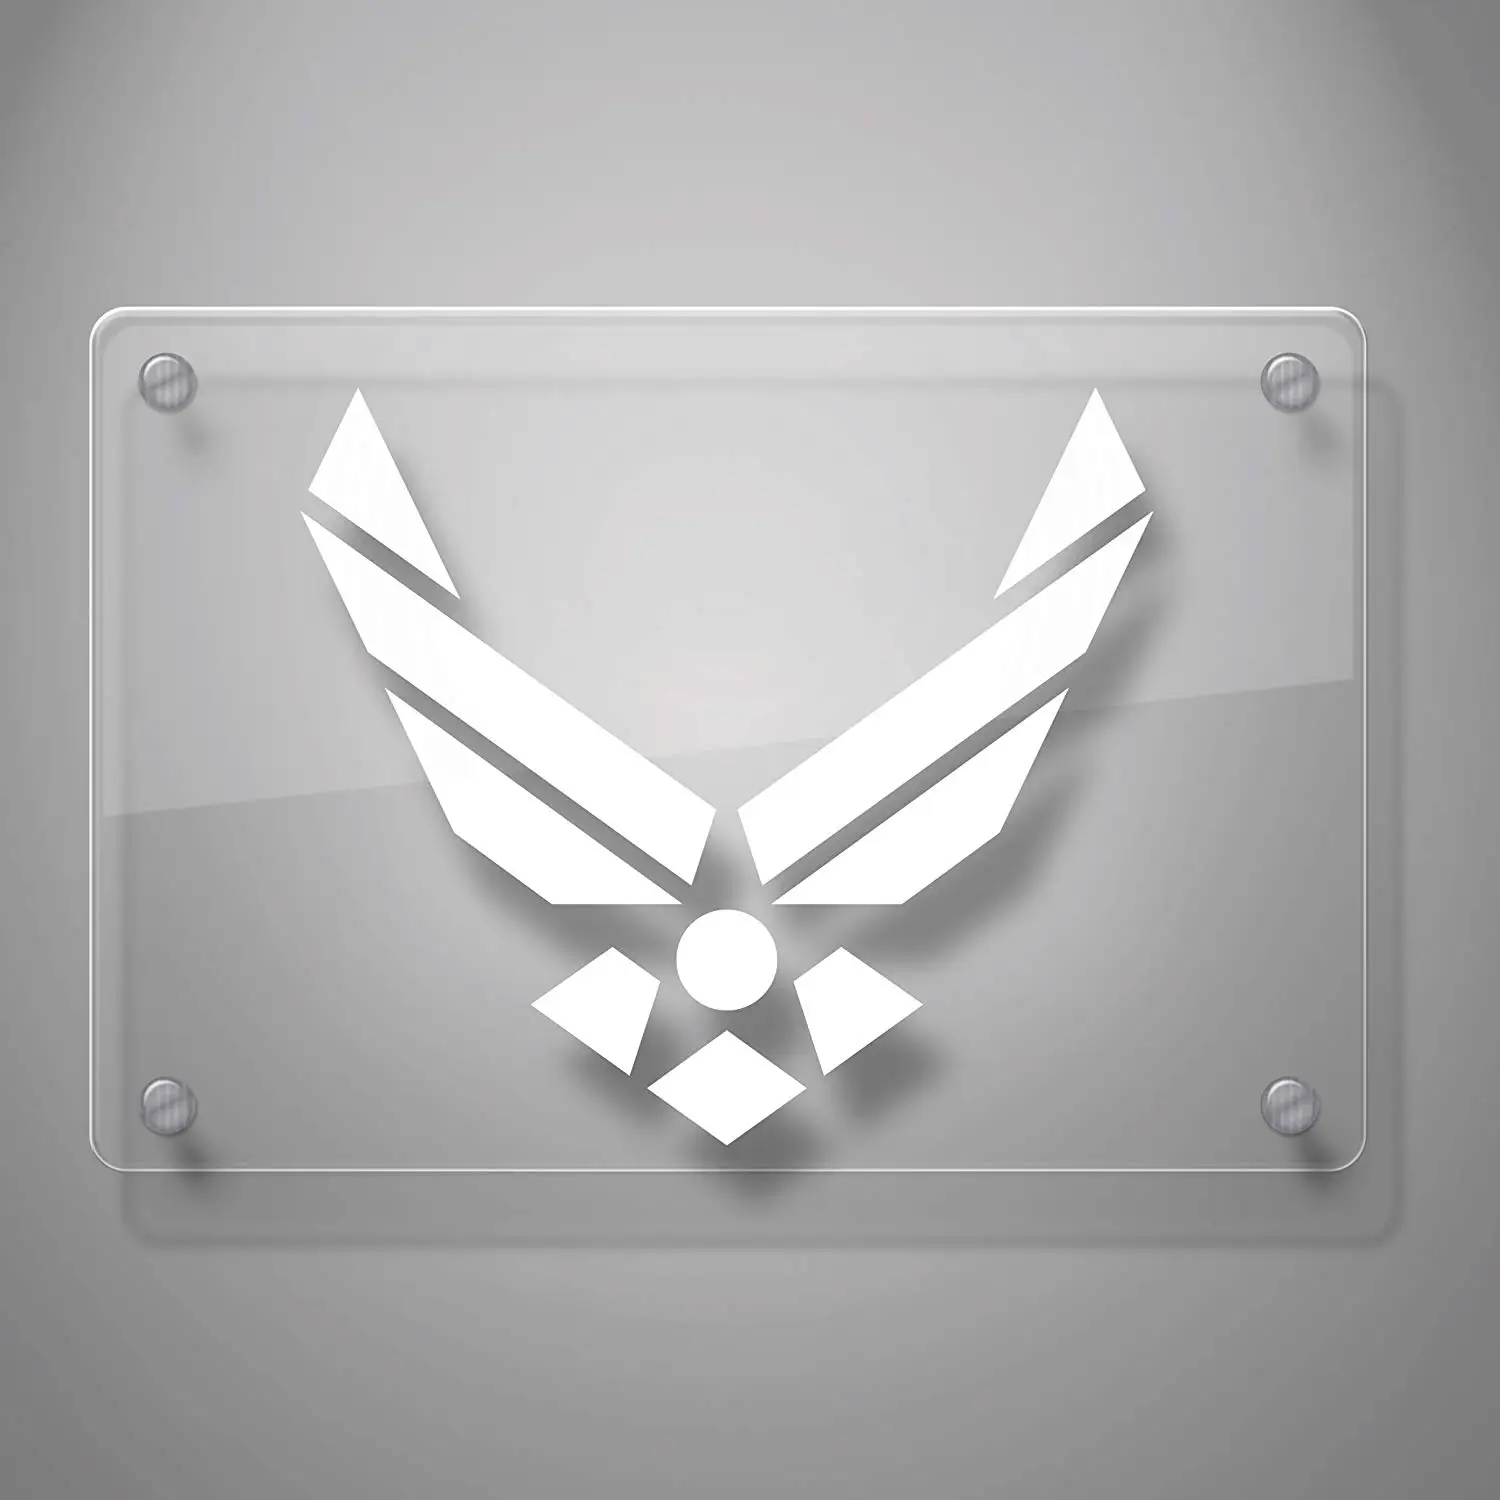 

Graphics Air Force Decal Sticker for Car Window, Laptop, Motorcycle, Walls, Mirror and More. # 561 (4